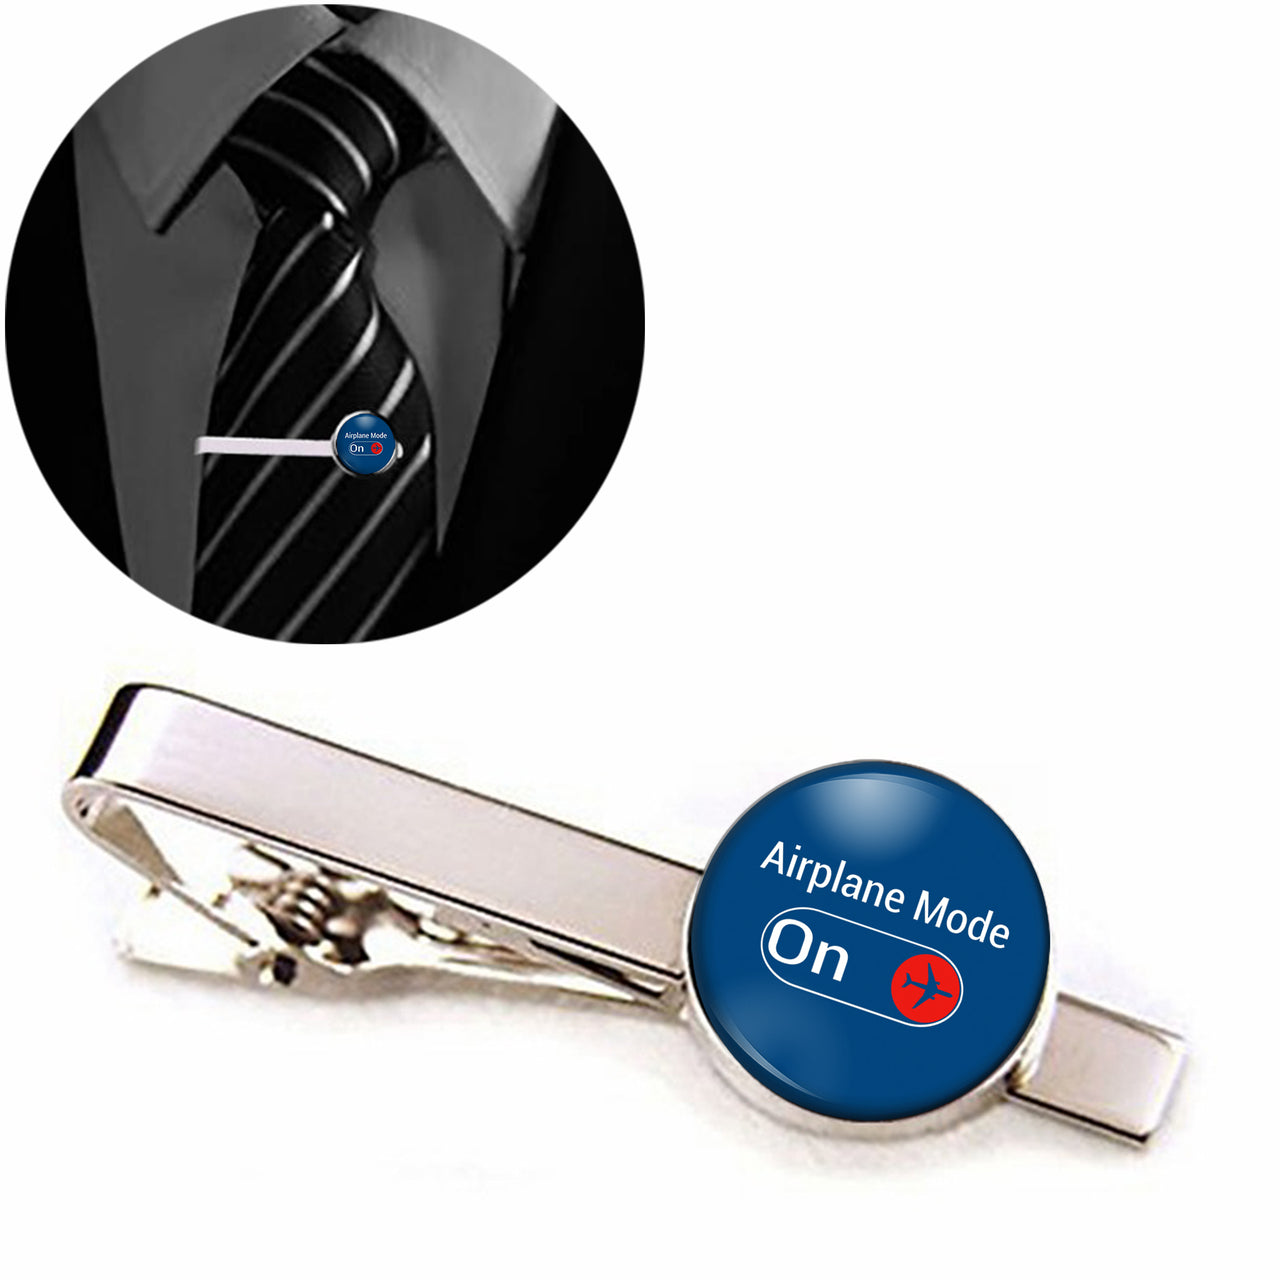 Airplane Mode On Designed Tie Clips